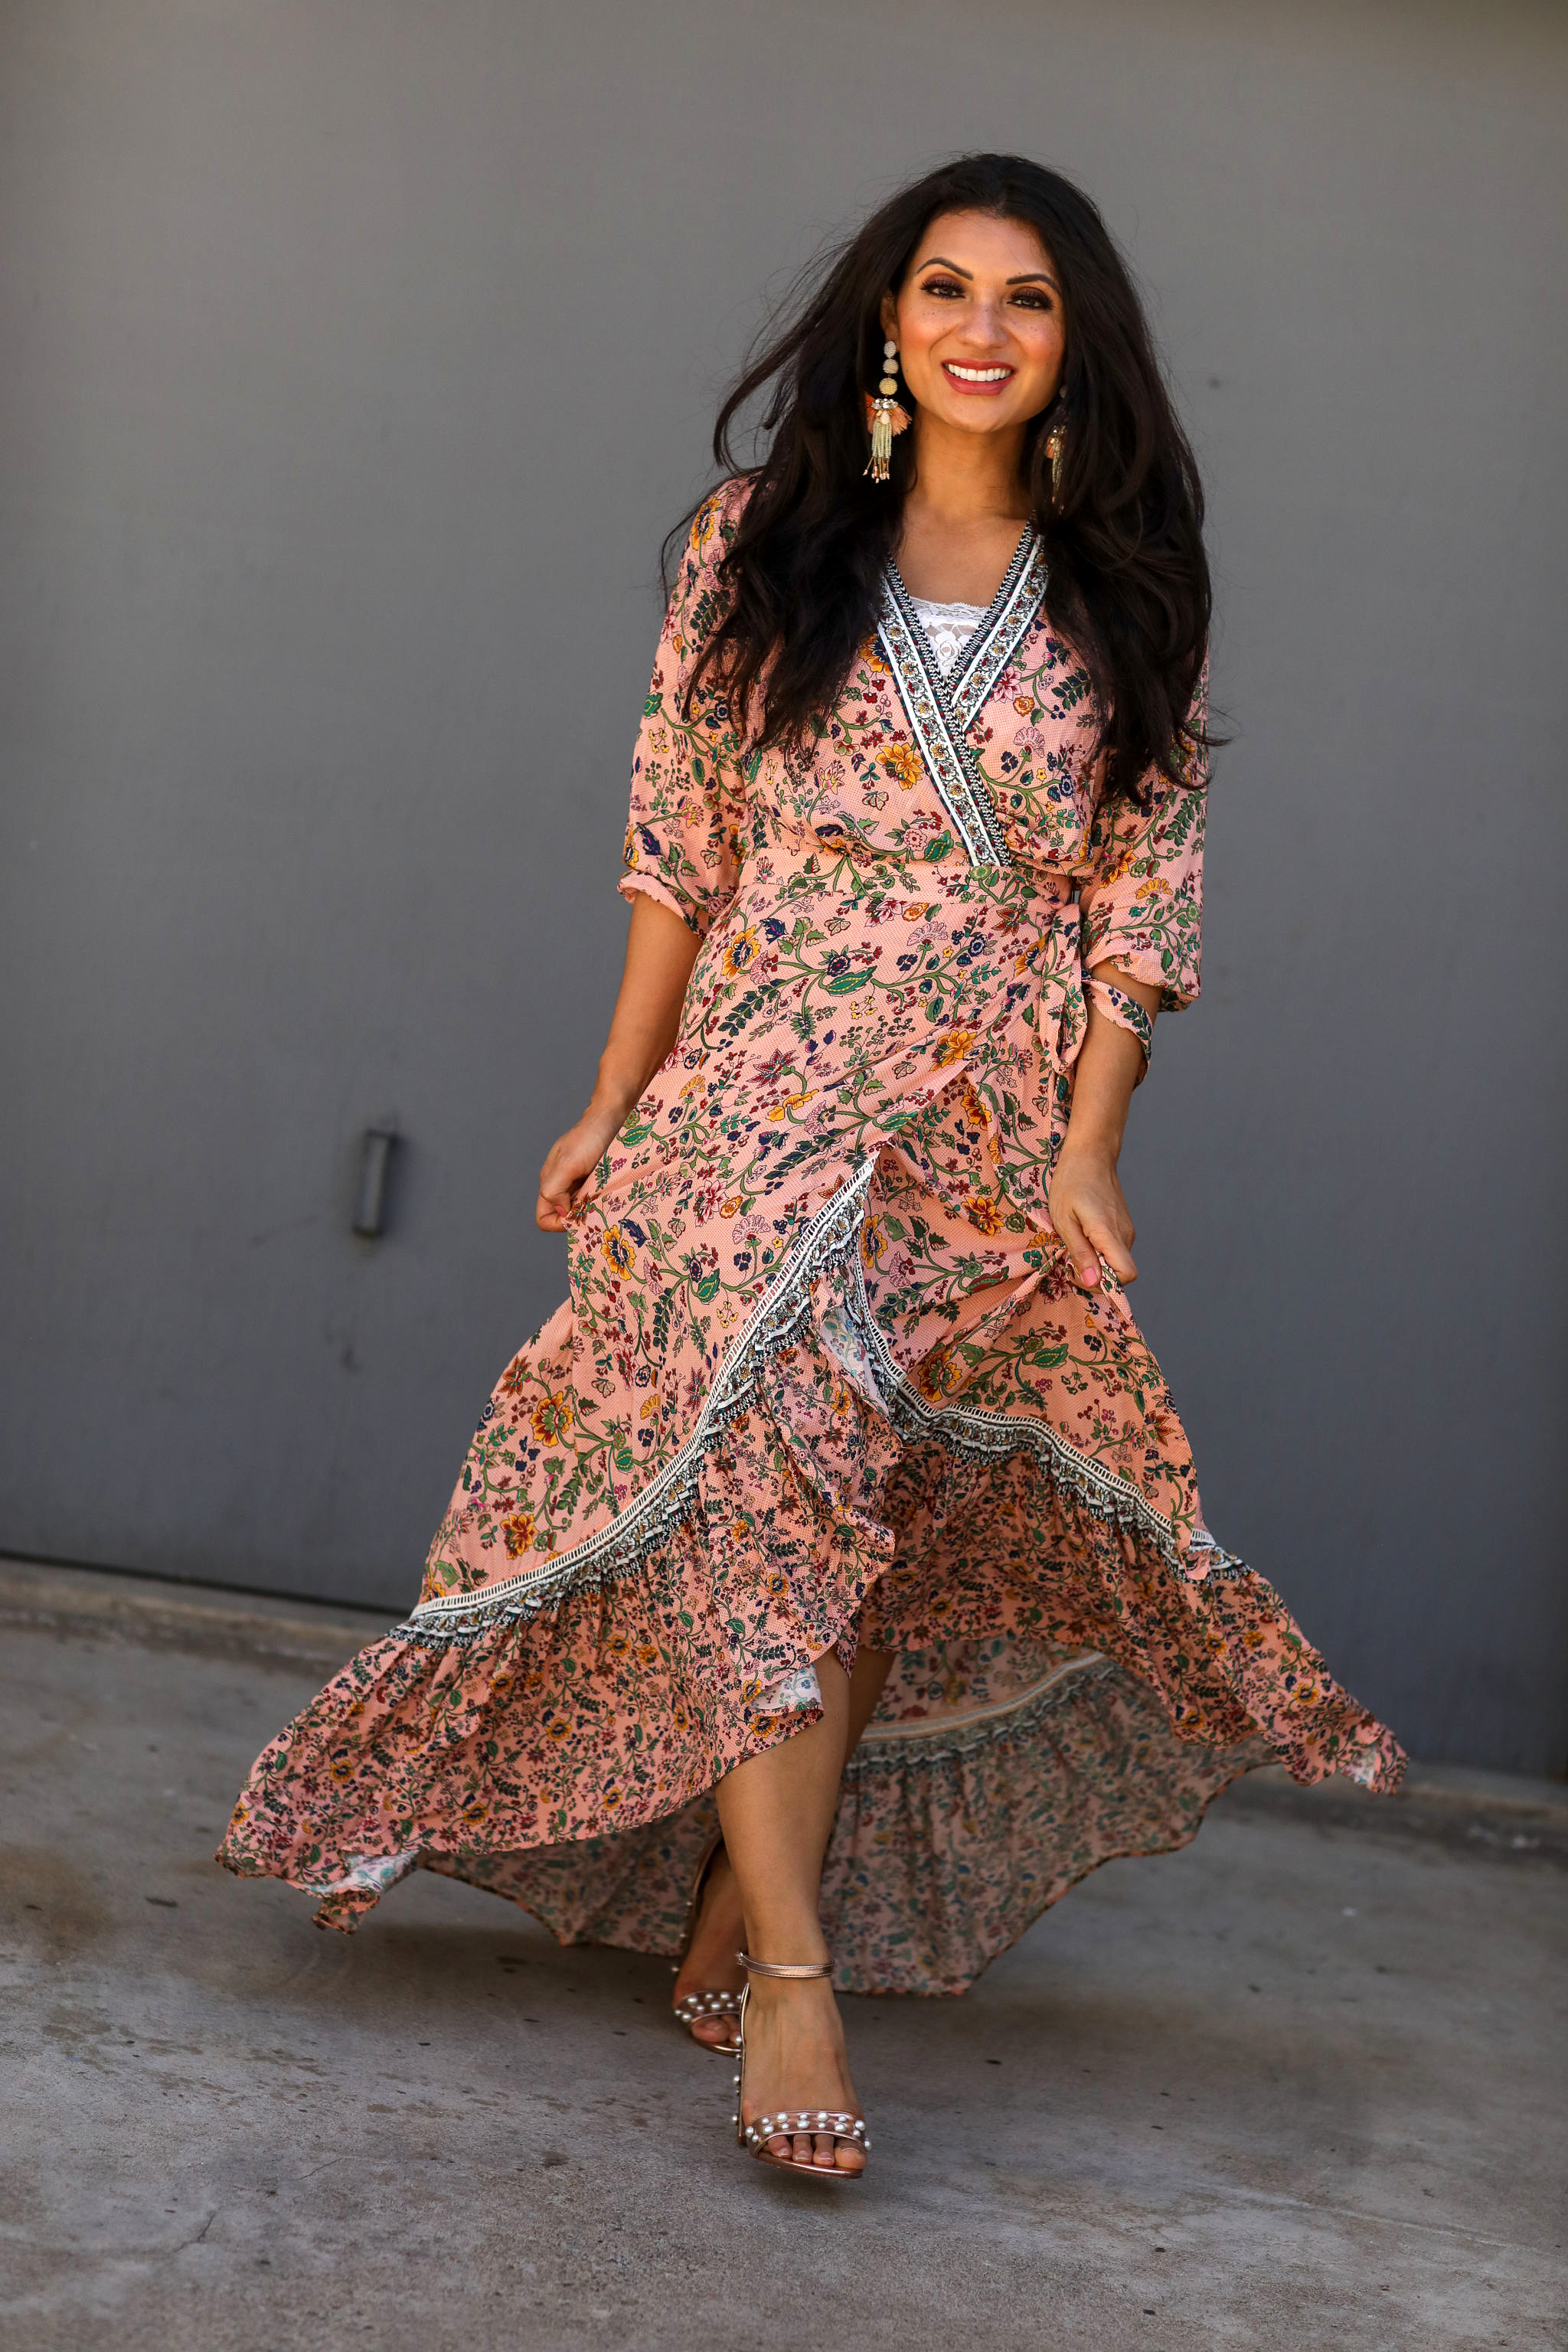 Looking for the perfect spring looks? Orange County Blogger Debbie Savage is sharing her top spring looks with Anthropologie. See them here!